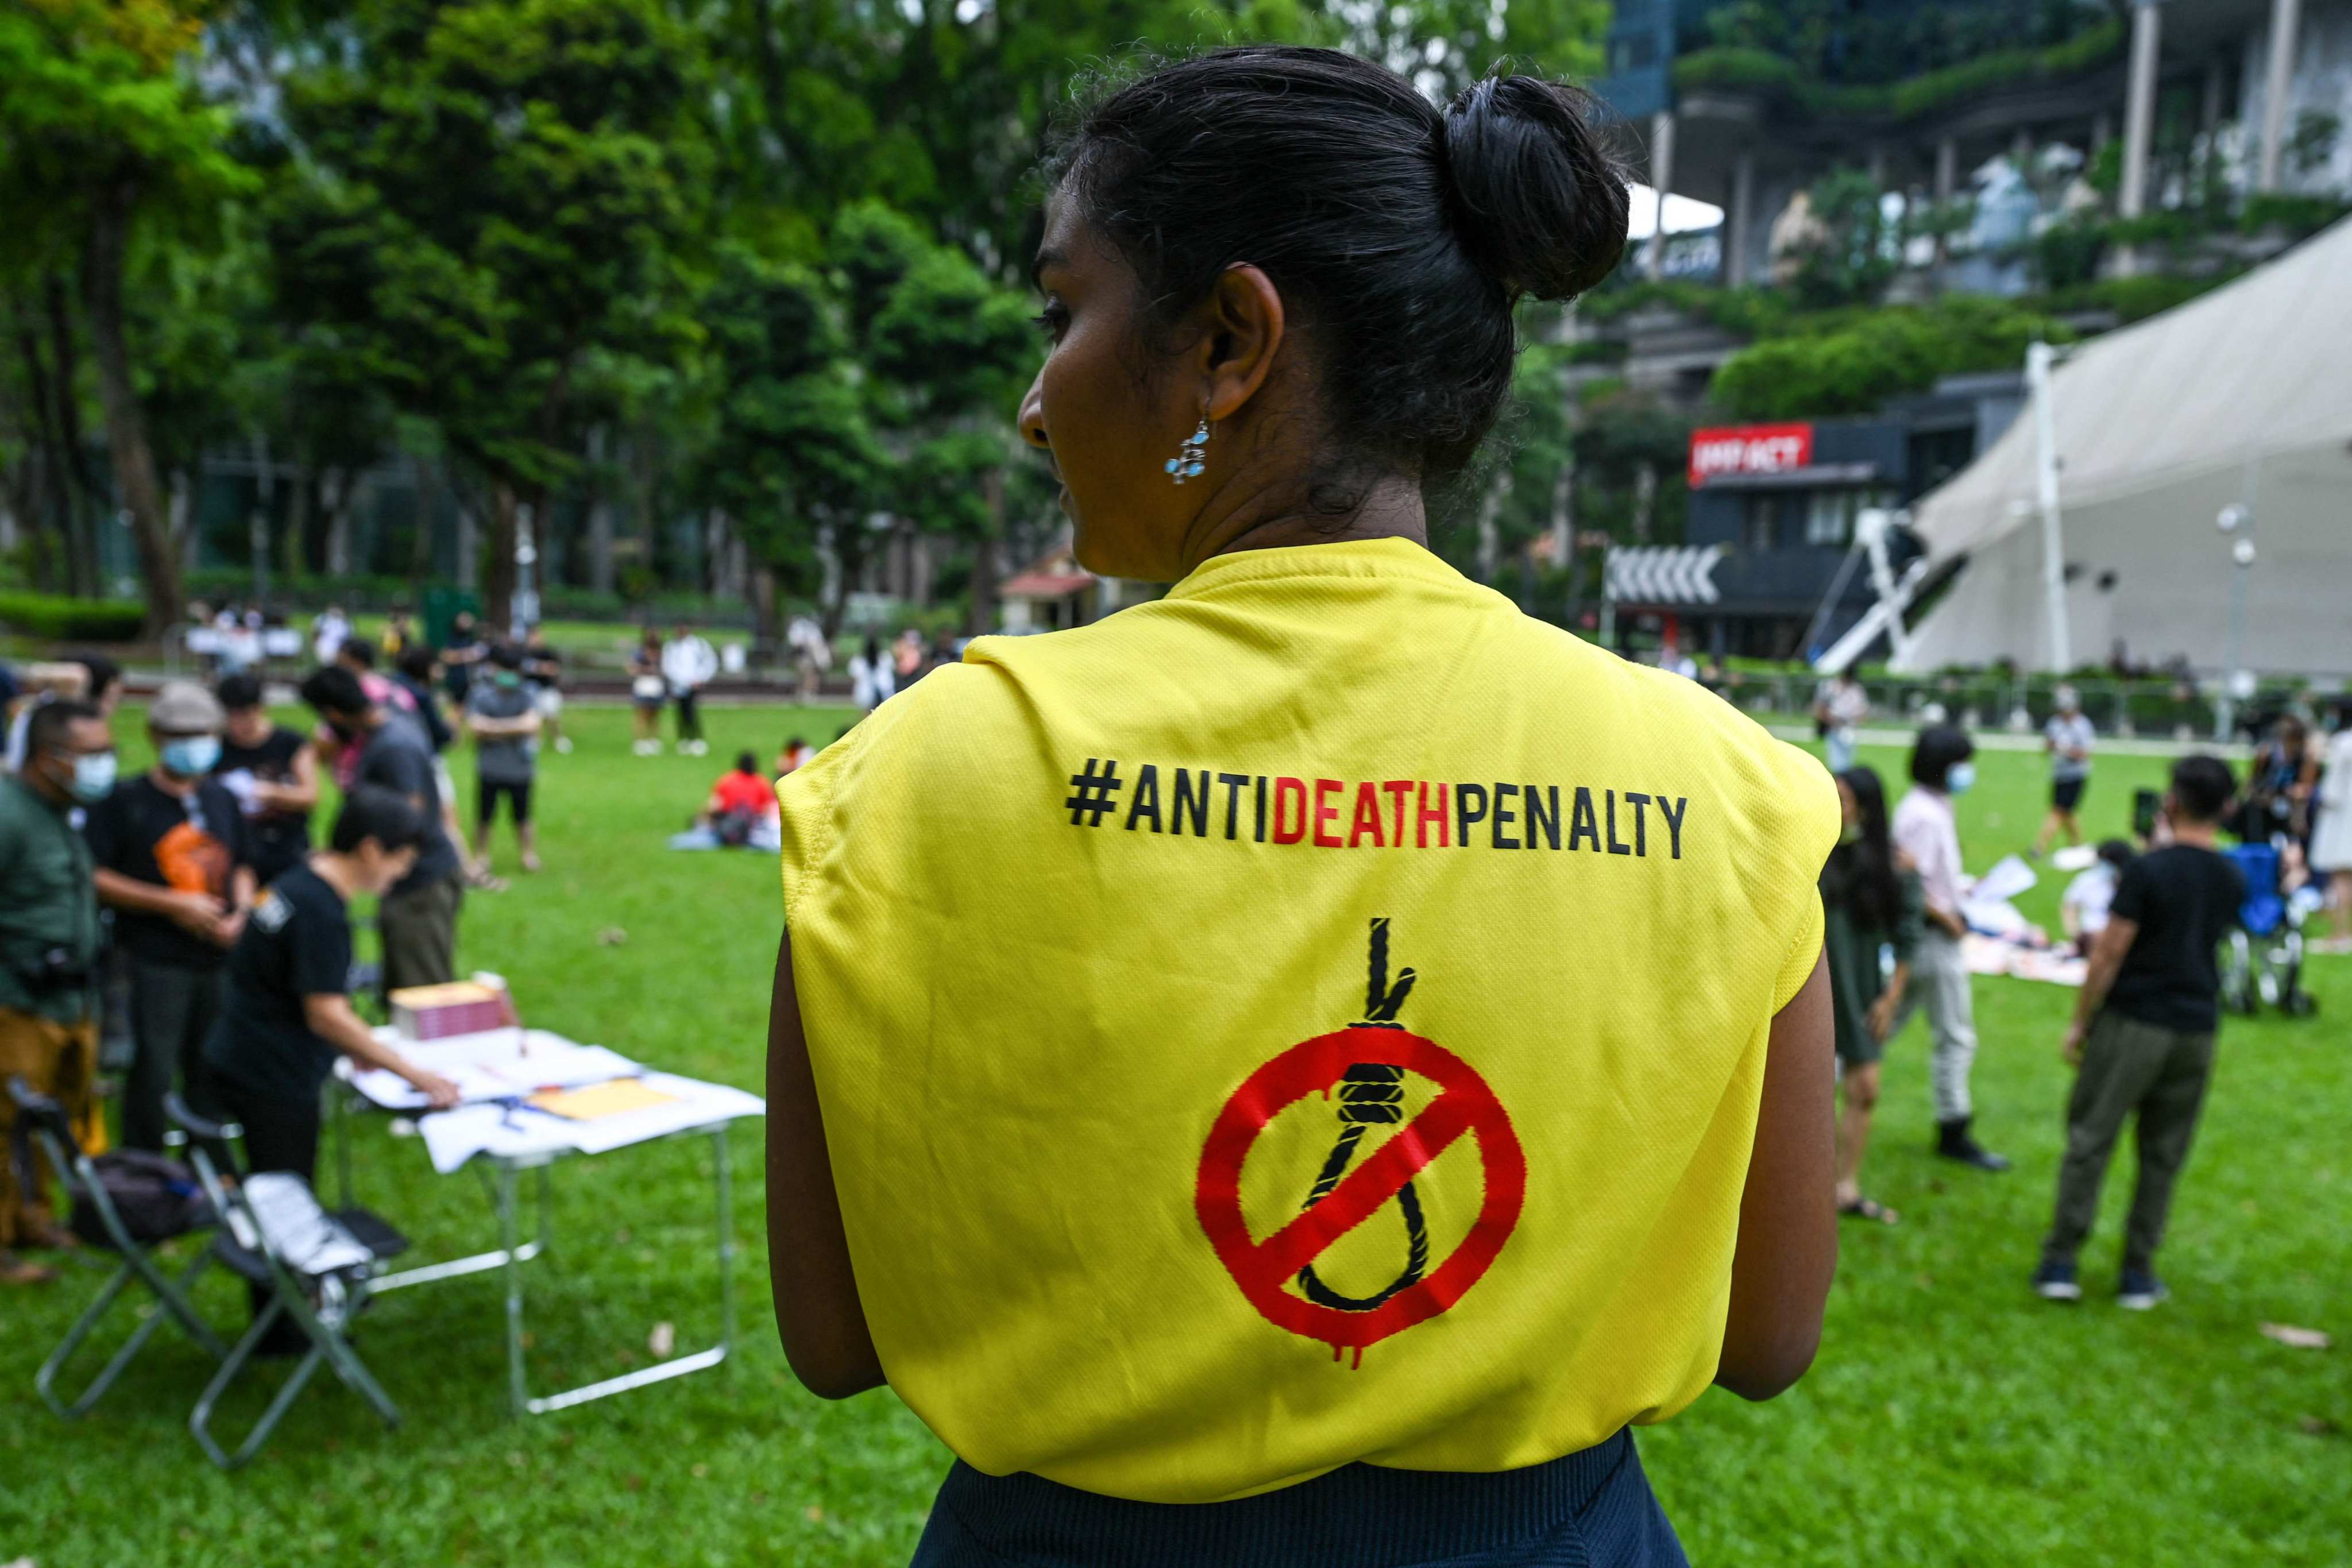 An activist protests against Singapore’s use of the death penalty at Speakers’ Corner in 2022. Singapore’s law minister said anti-death penalty activists were full of “baseless allegations, one-sided claims and half-truths”. Photo: AFP